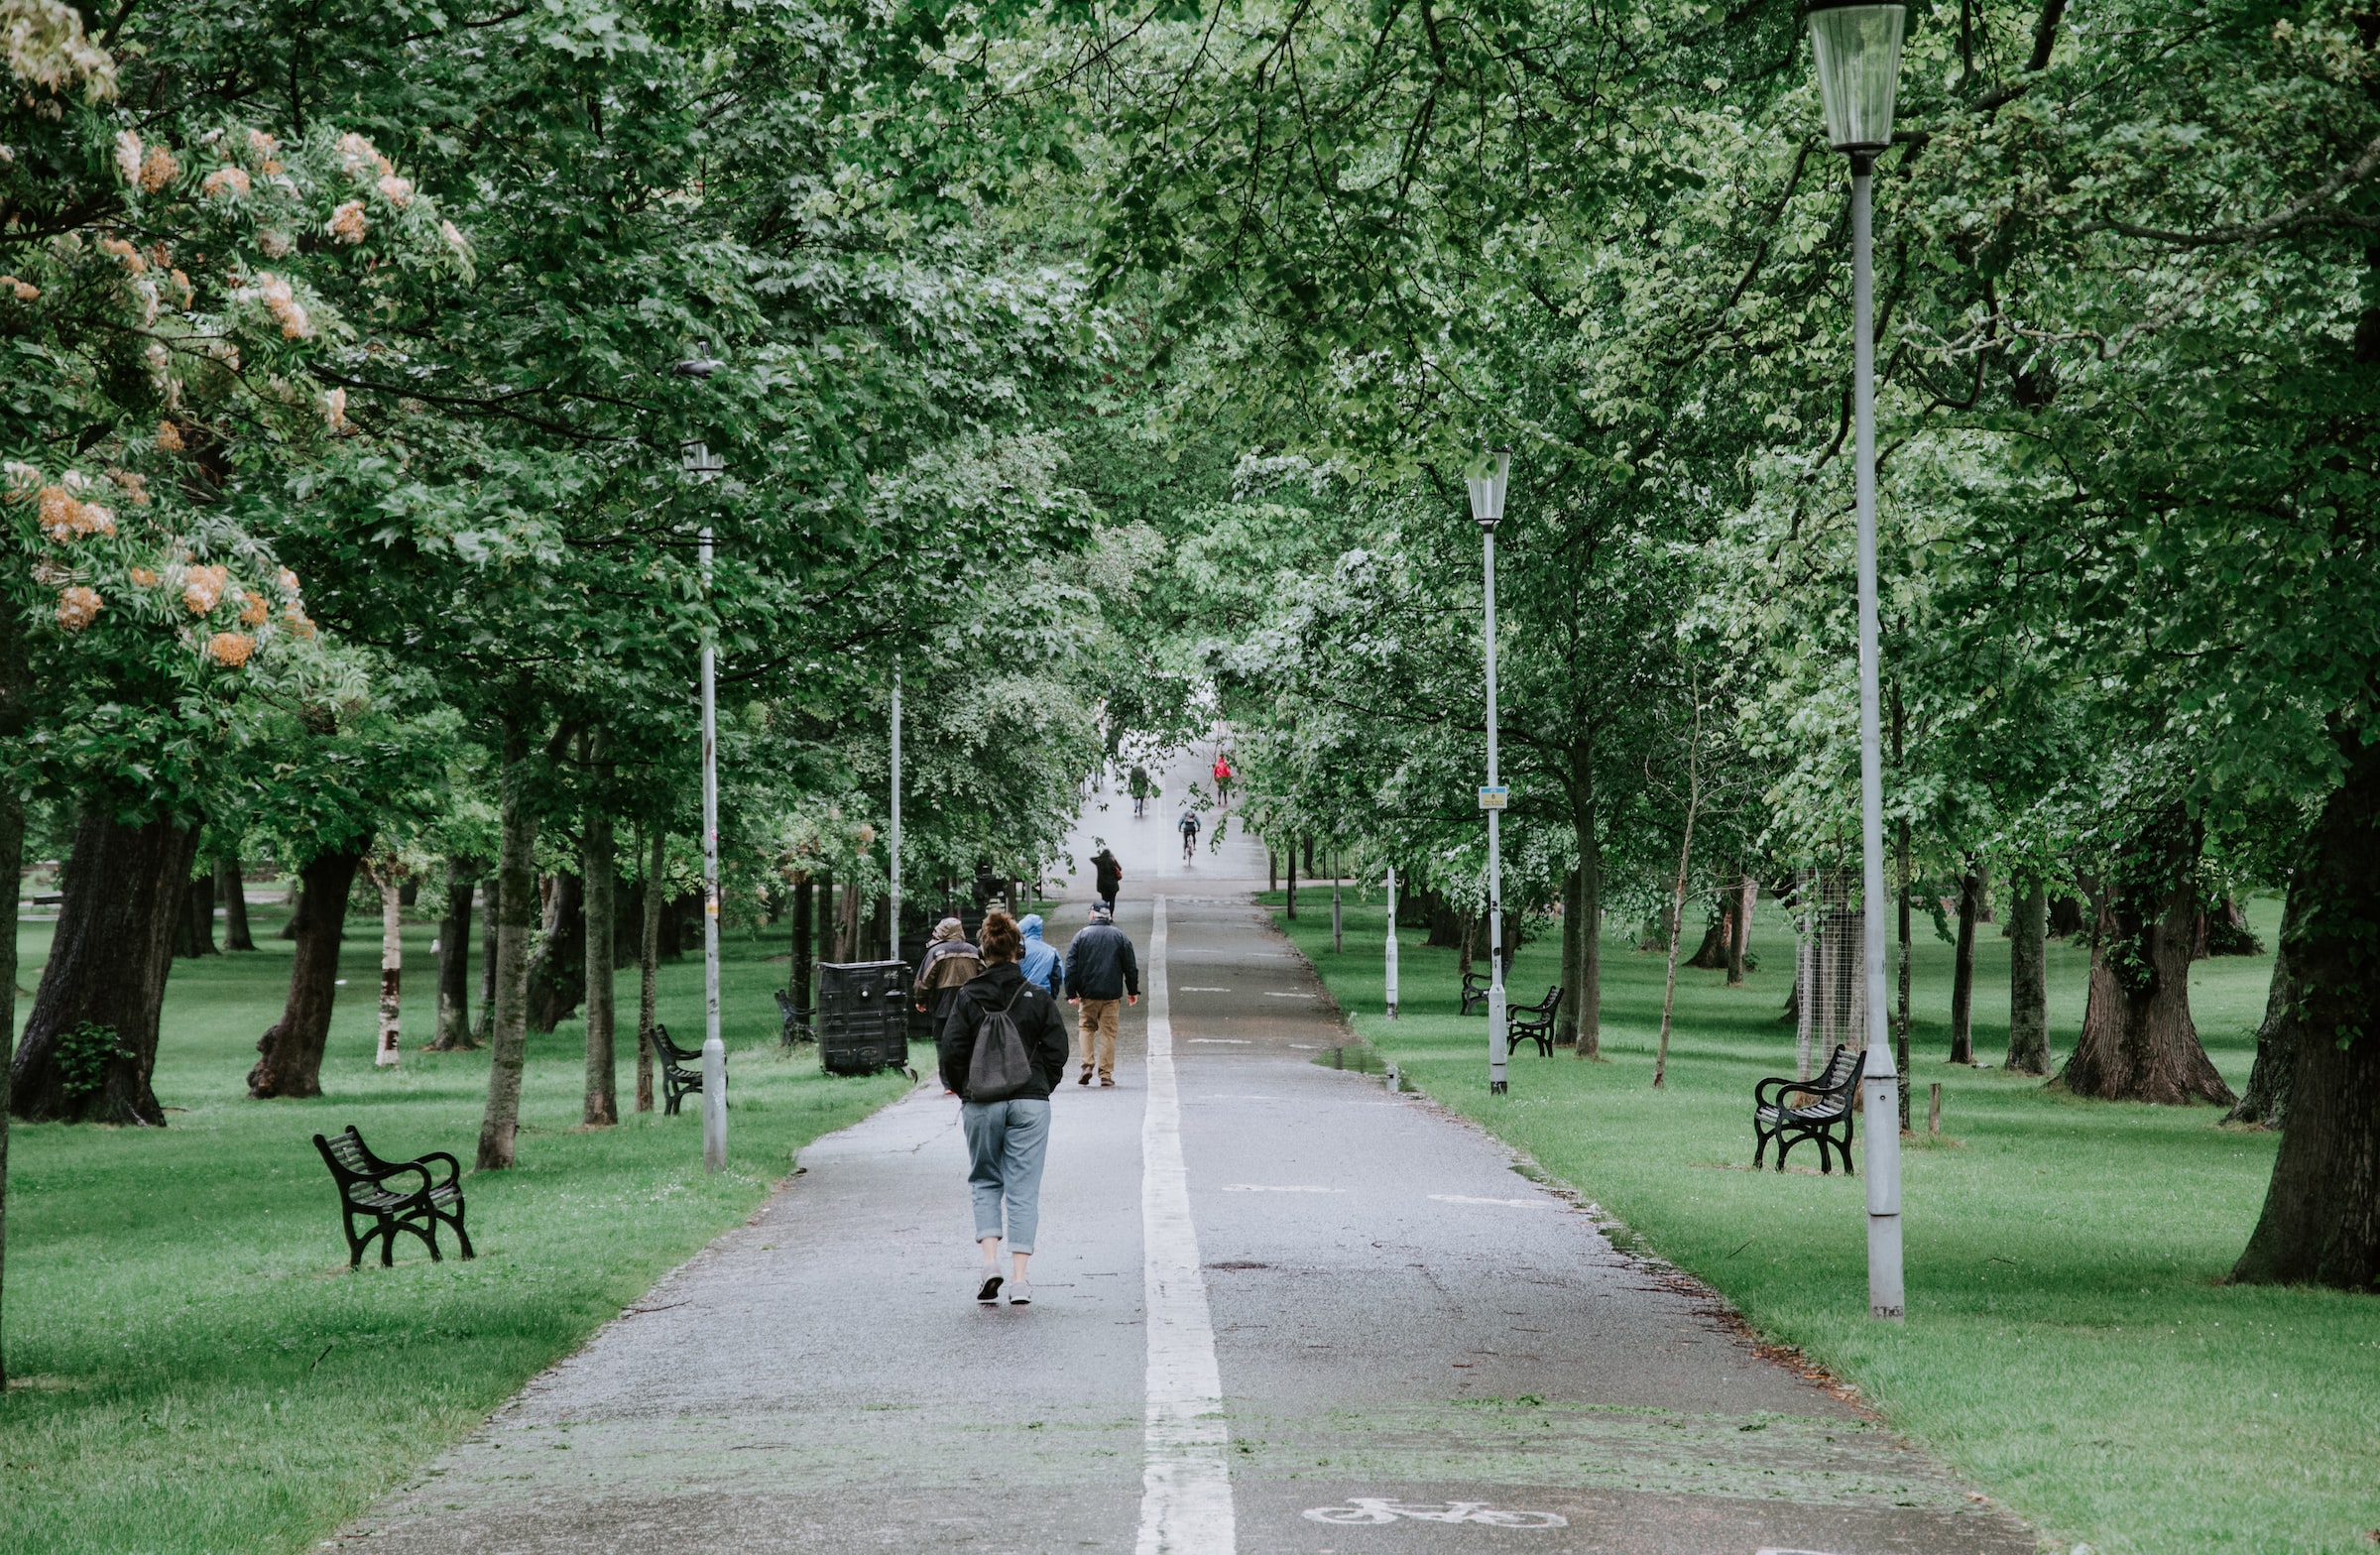 Walk in the park - Photo by Adli Wahid on Unsplash